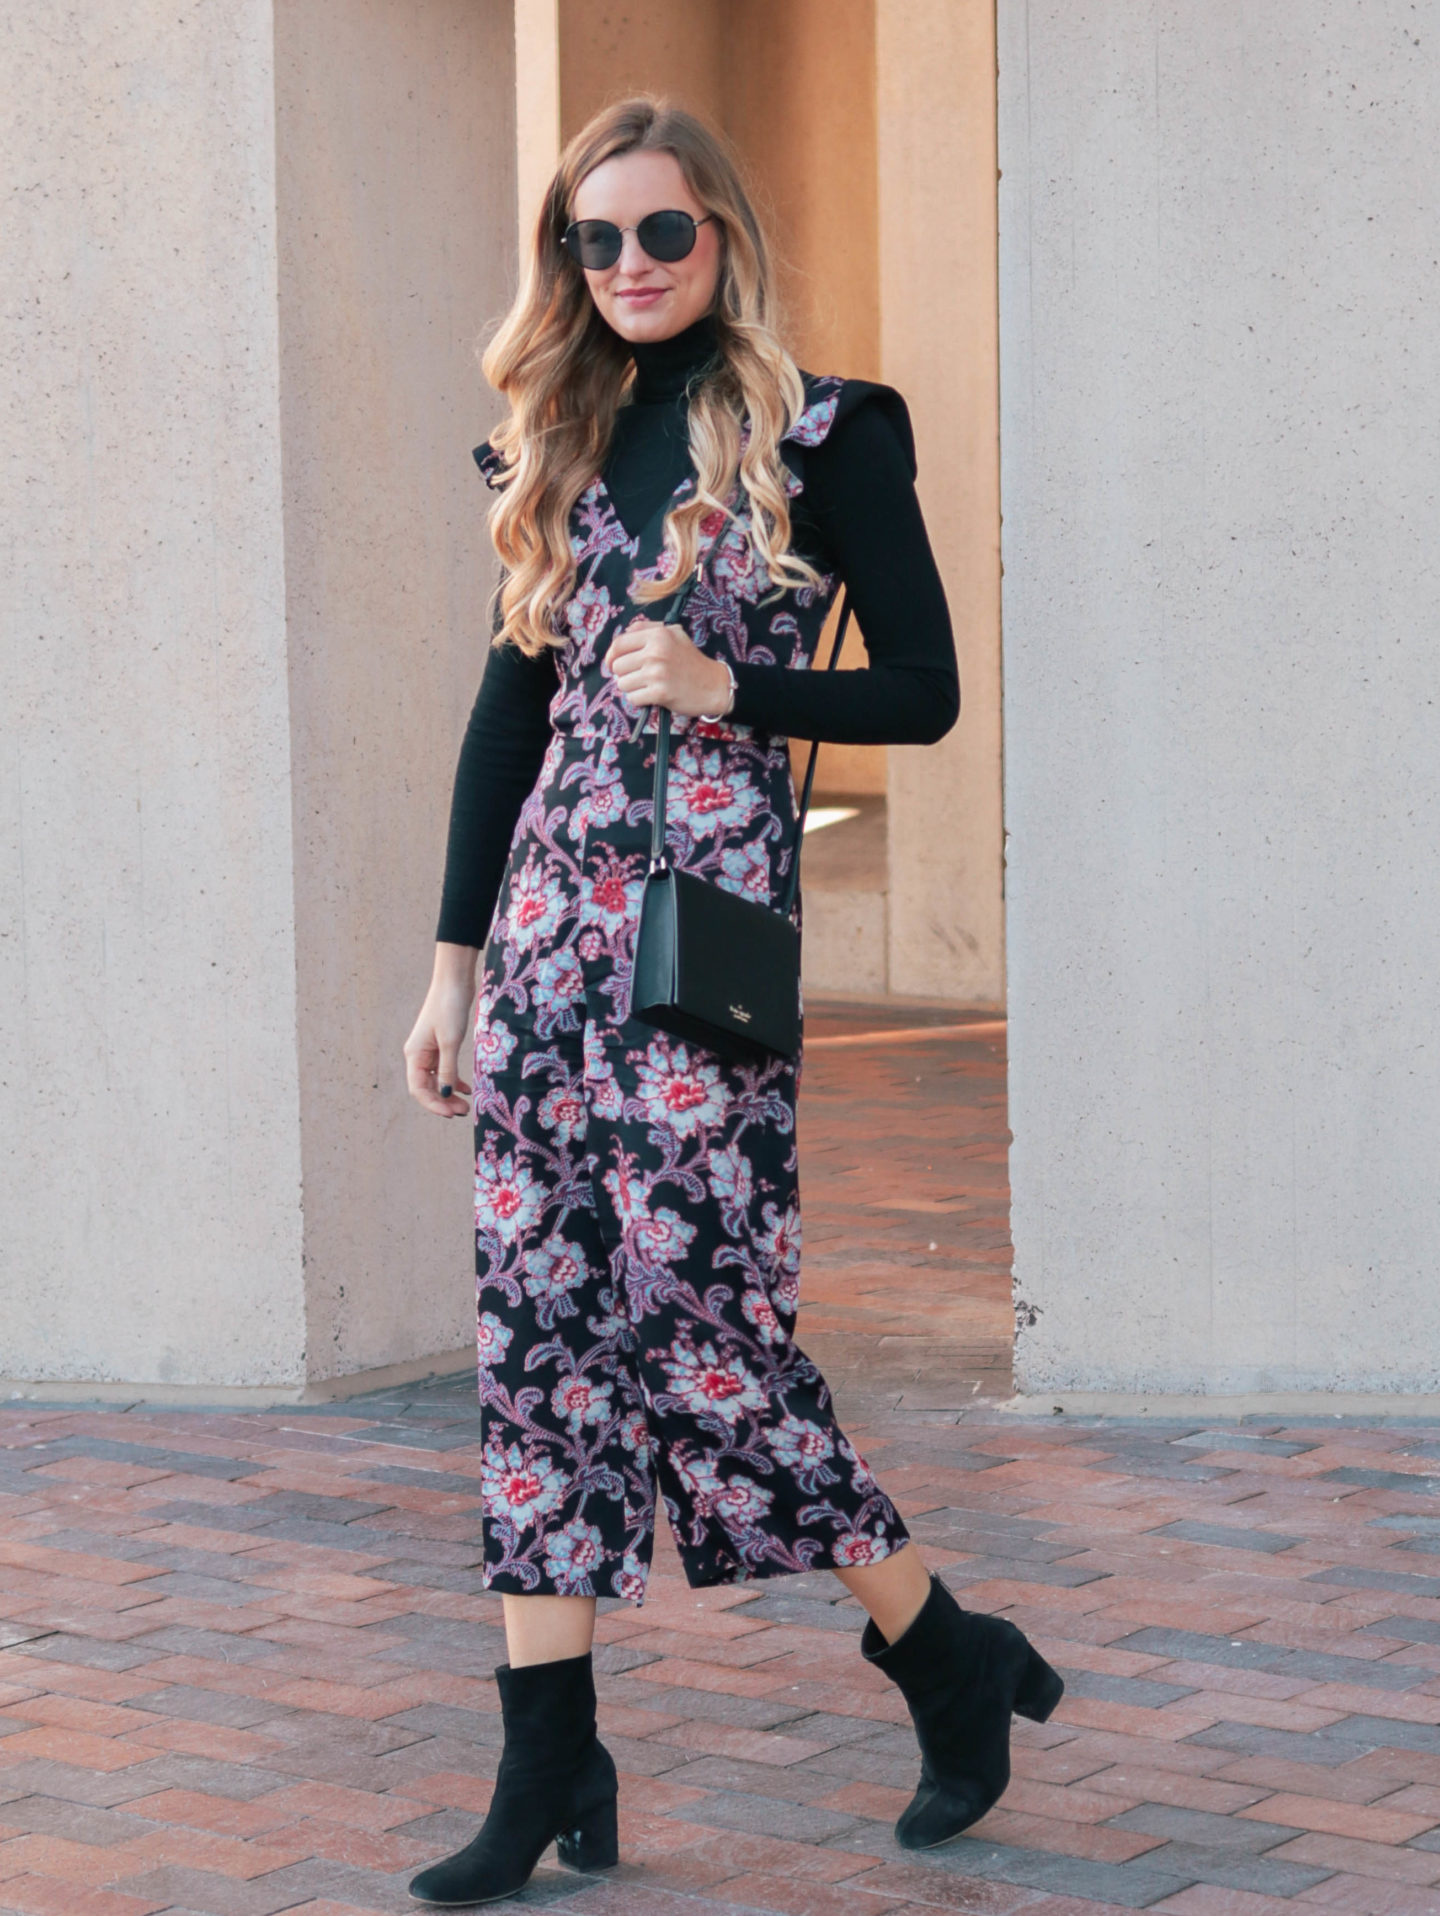 Fashion blogger, Leigha Gardner, of The Lilac Press wearing donning a black turtleneck to transition a floral jumper from warm weather wear to winter wear.